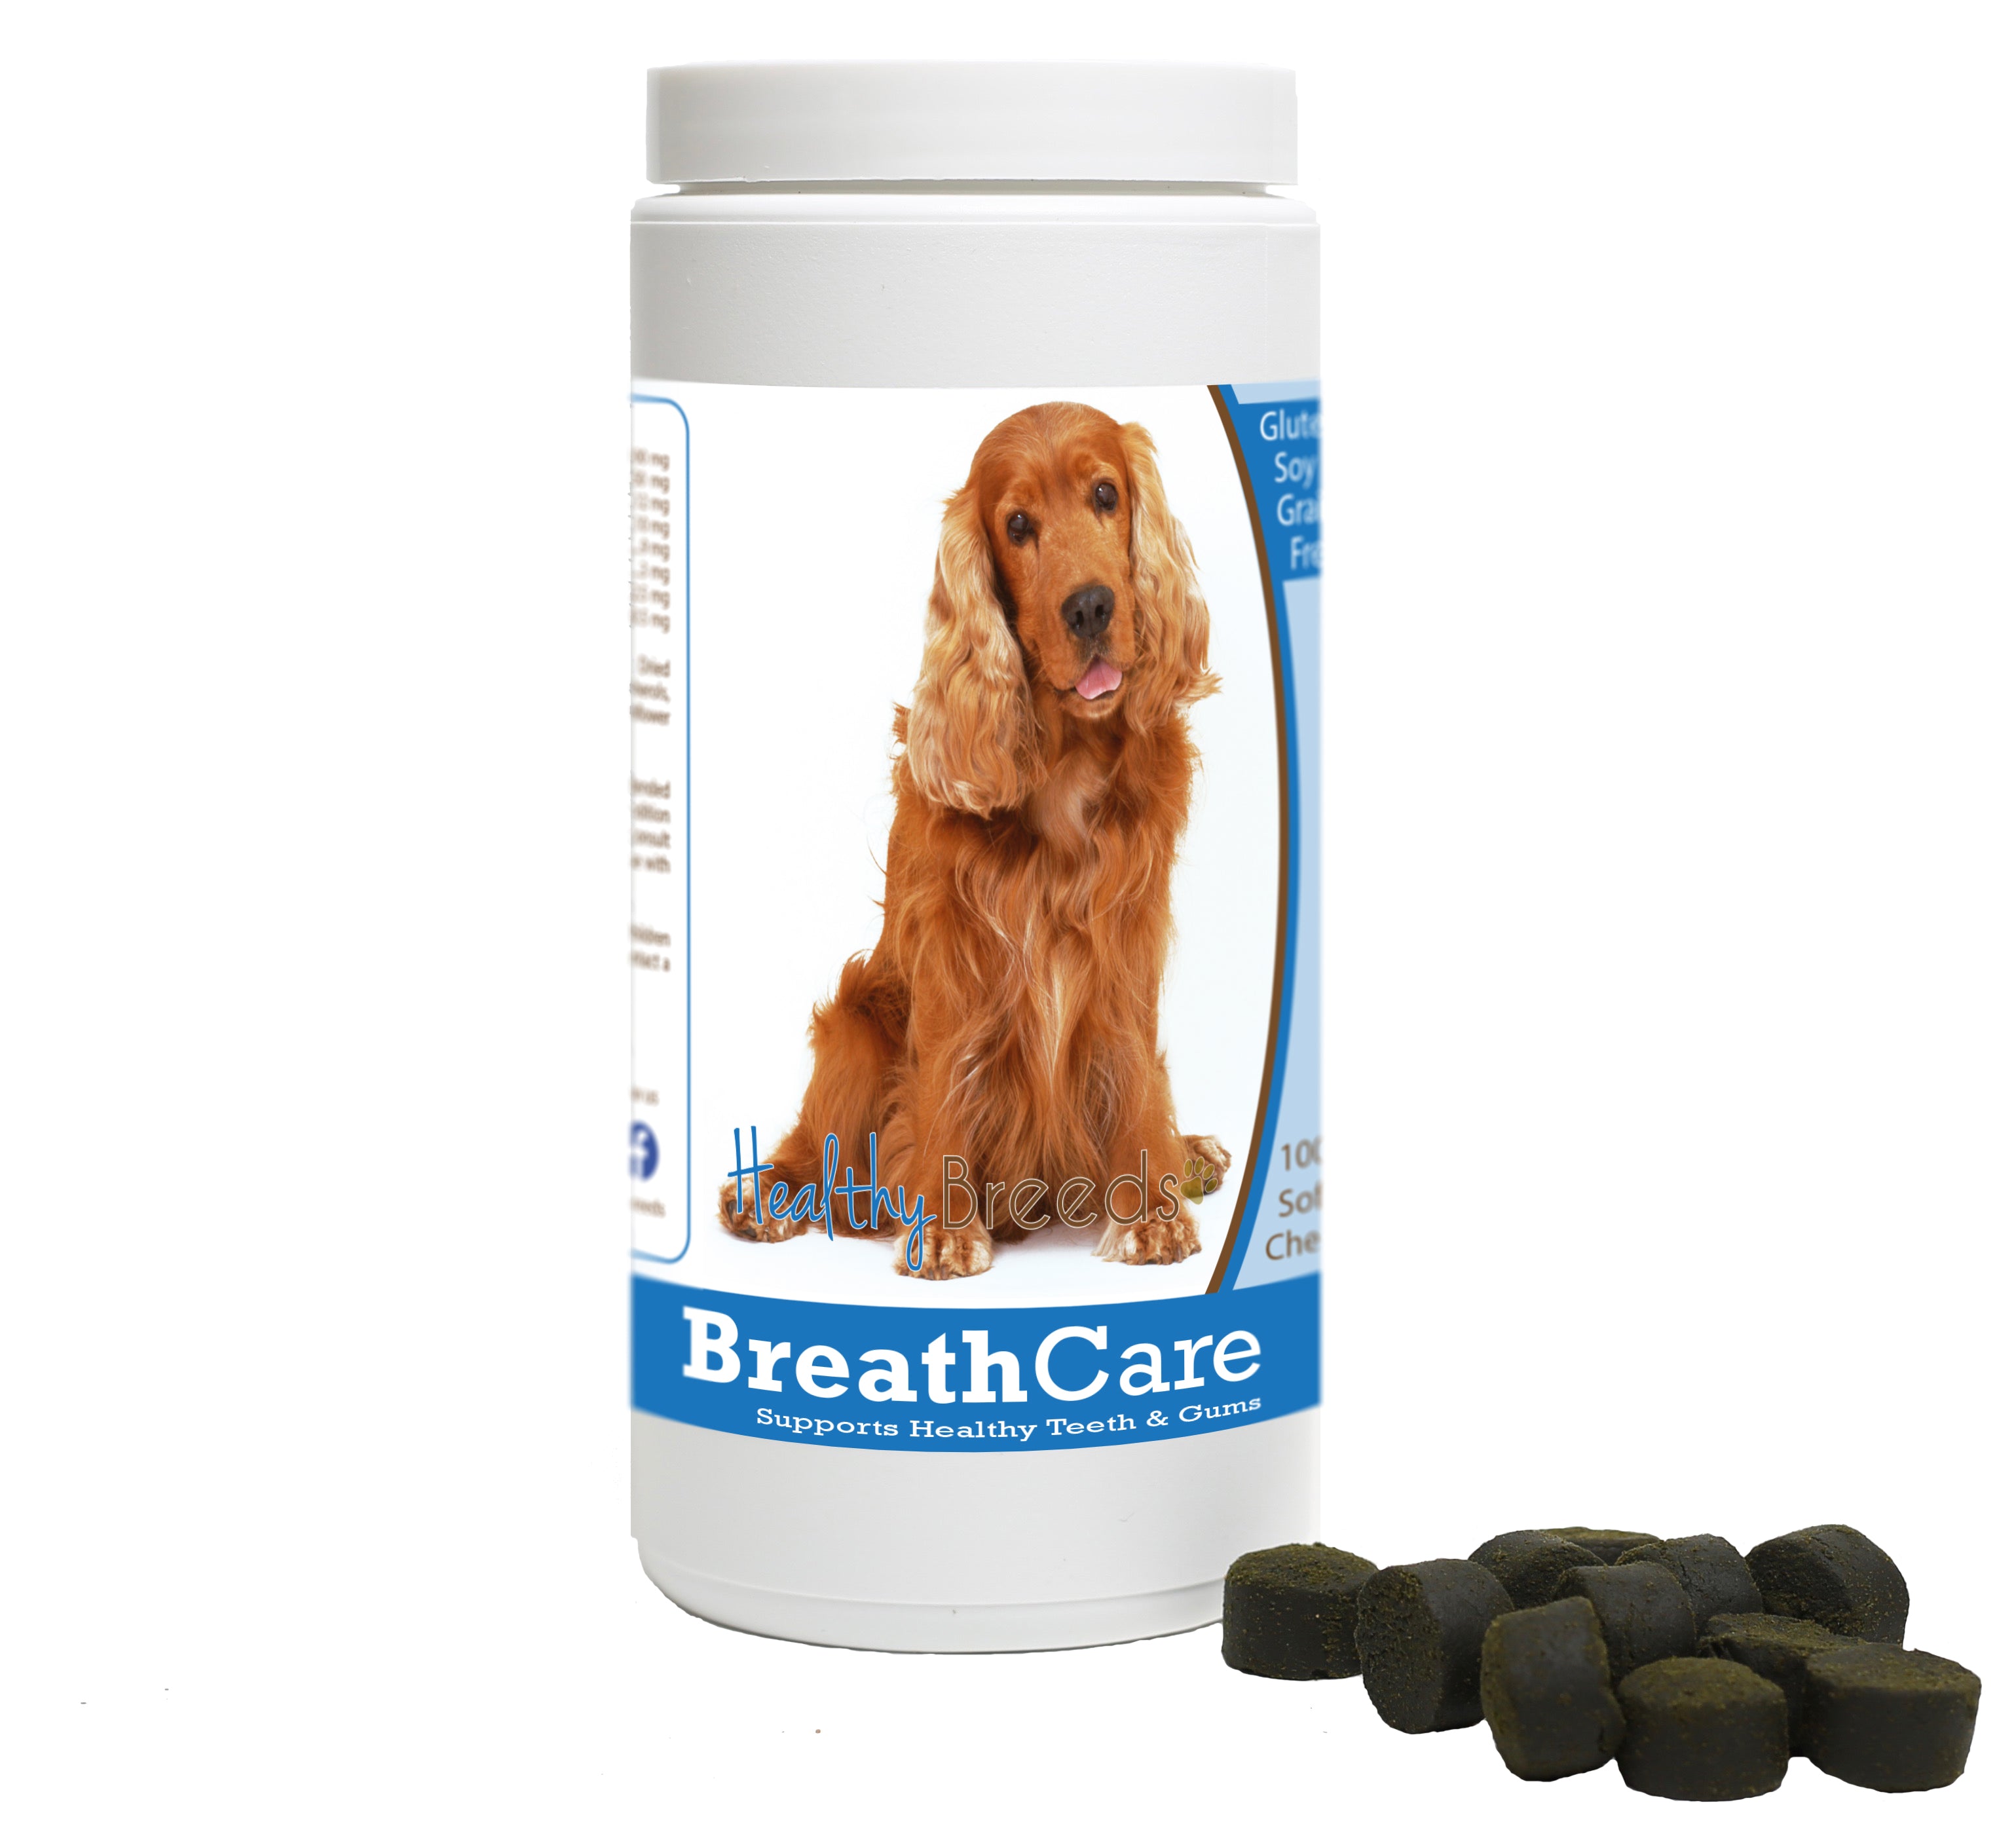 Cocker Spaniel Breath Care Soft Chews for Dogs 60 Count